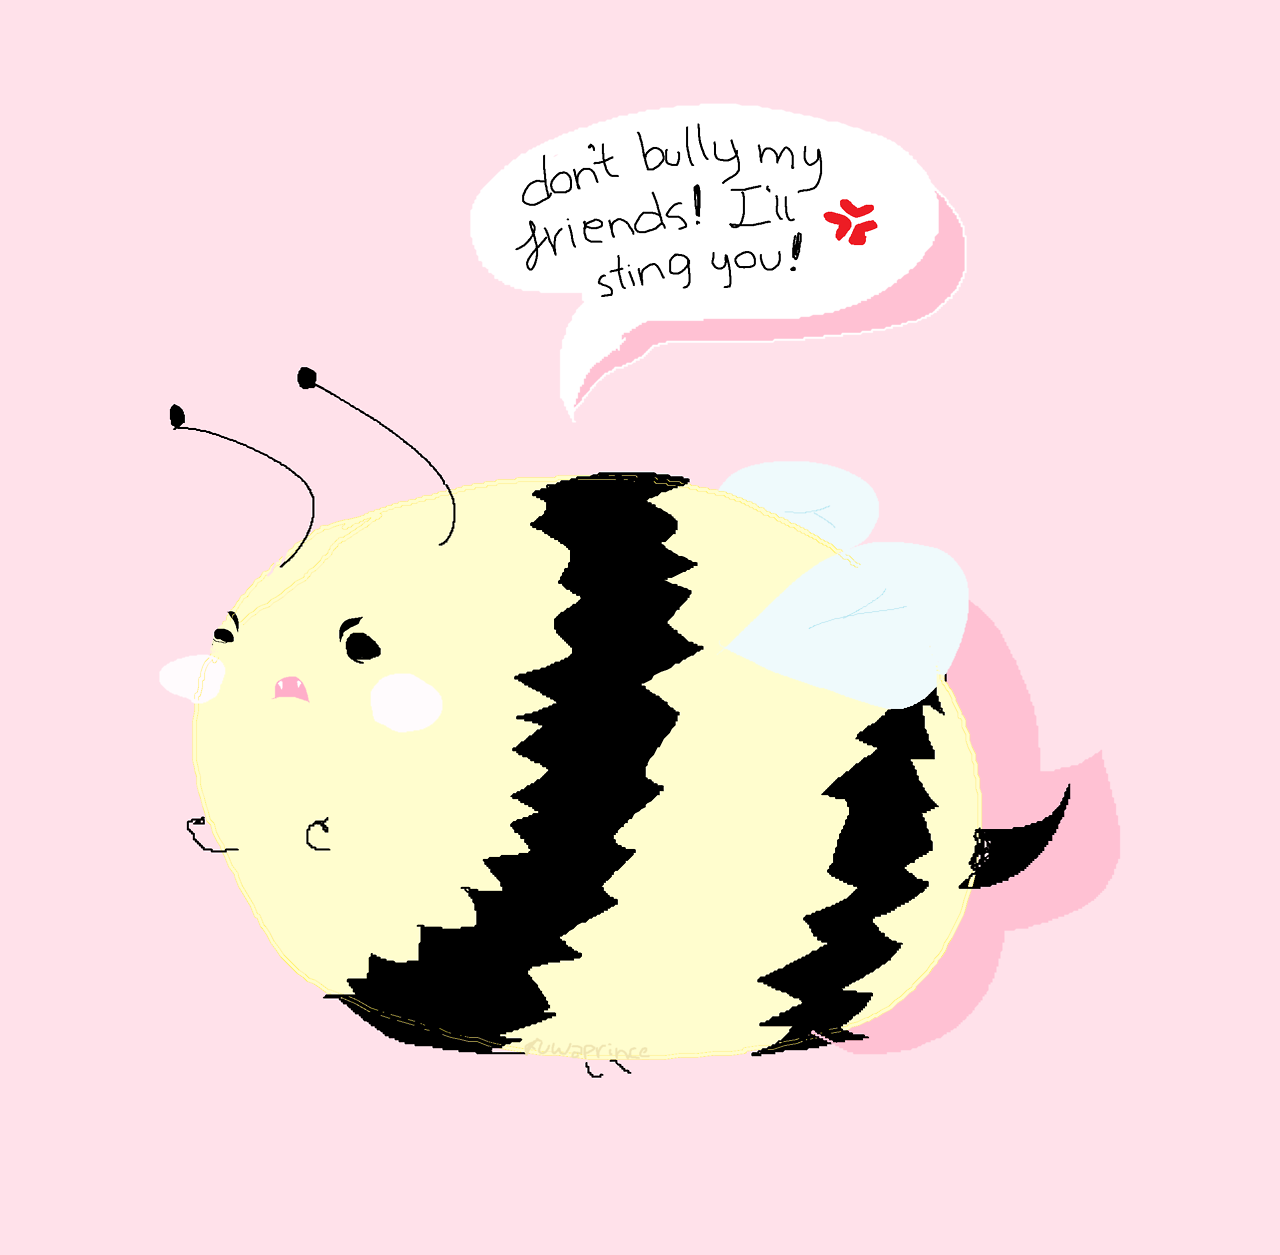 littlefreak-ofnature:  fuwaprince: 🌸he means bees-iness!🌸  Omg 😂 “bees-iness”